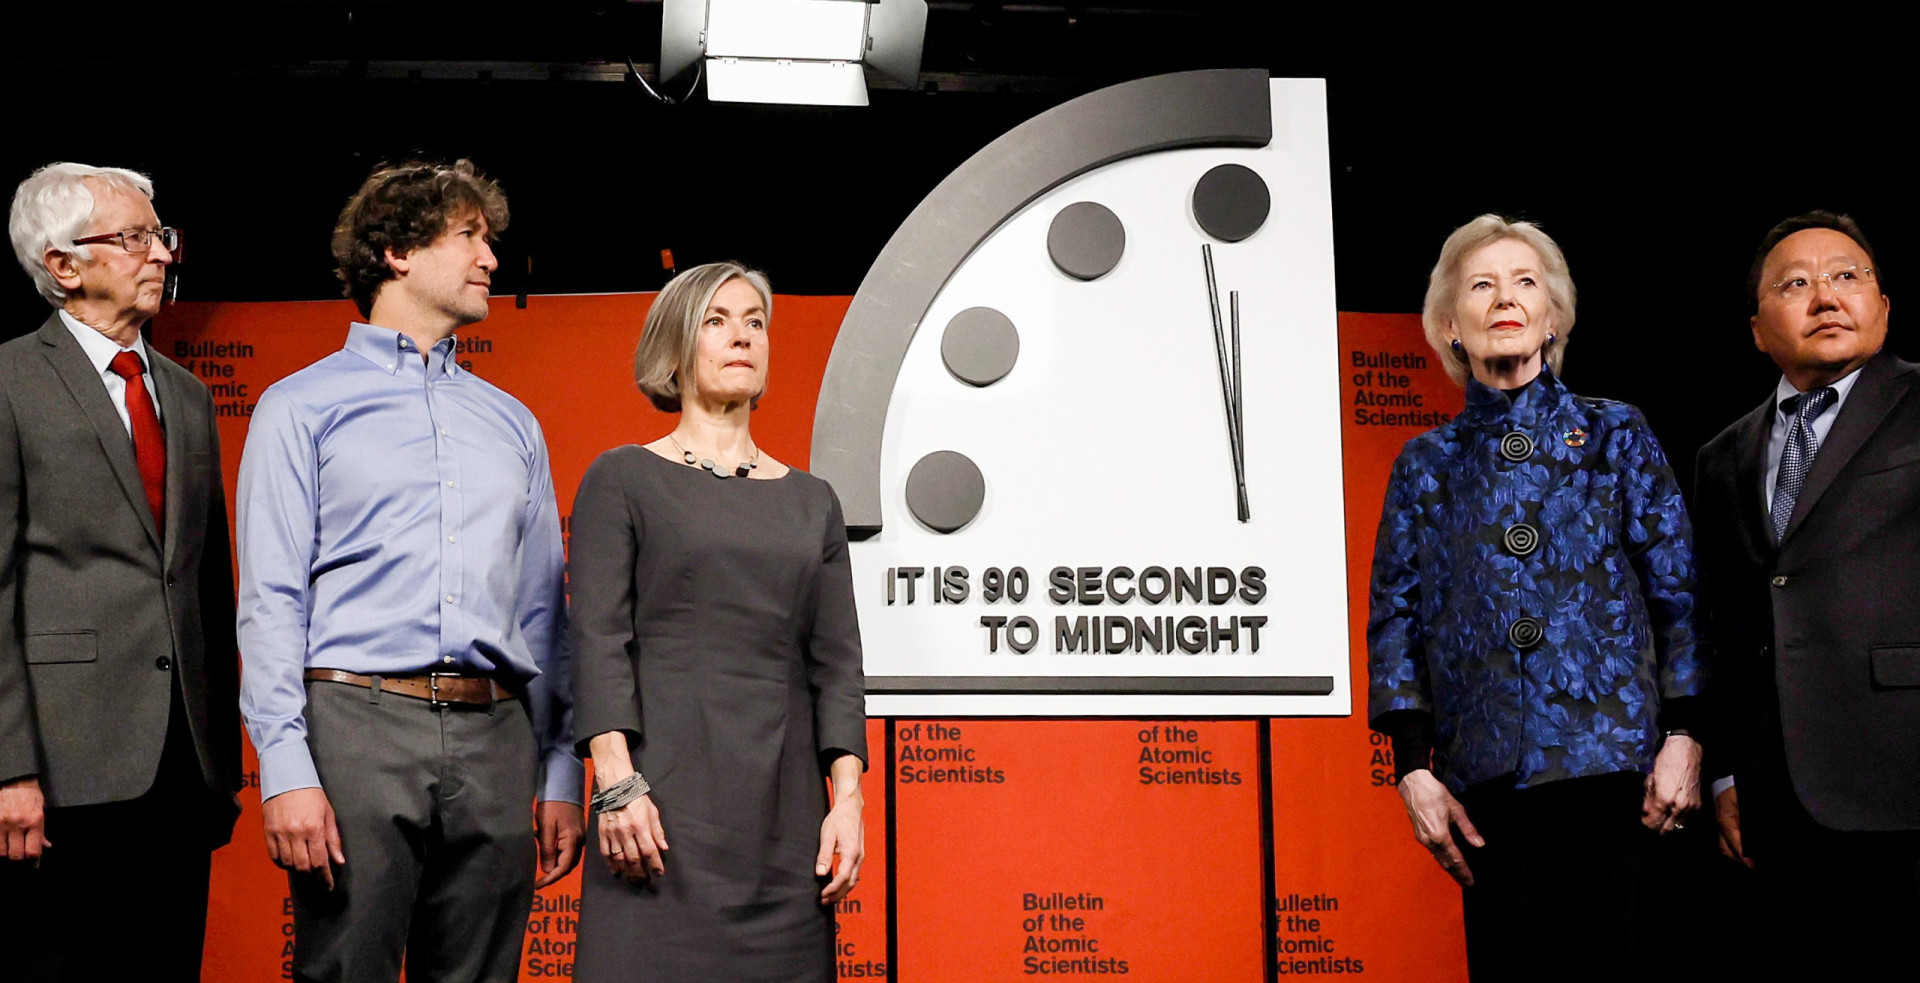 <p>In 2023, the clock was moved 10 seconds closer to midnight, leaving us just 90 seconds away from doomsday. This was in response to Russia's attack on Ukraine and the imminent threat of nuclear war. “We are sending a message that the situation is becoming more urgent,” said Rachel Bronson, President of the Bulletin of Atomic Scientists. "Crises are more likely to happen and have broader consequences and longer standing effects.” Other threats to humanity mentioned included "nuclear weapon proliferation in China, Iran increasing its uranium enrichment, missile tests in North Korea, future pandemics from animal diseases, pathogens from lab mistakes, “disruptive technologies,” and worsening climate change."</p> <p>Sources: (BBC) (Bulletin of the Atomic Scientists) (CTBTO)</p> <p>See also: <a href="https://www.starsinsider.com/travel/354889/after-chernobyl-meet-the-ukrainian-ghost-city">After Chernobyl: meet the Ukrainian ghost city</a></p><p><a href="https://www.msn.com/en-ca/community/channel/vid-7xx8mnucu55yw63we9va2gwr7uihbxwc68fxqp25x6tg4ftibpra?cvid=94631541bc0f4f89bfd59158d696ad7e">Follow us and access great exclusive content every day</a></p>